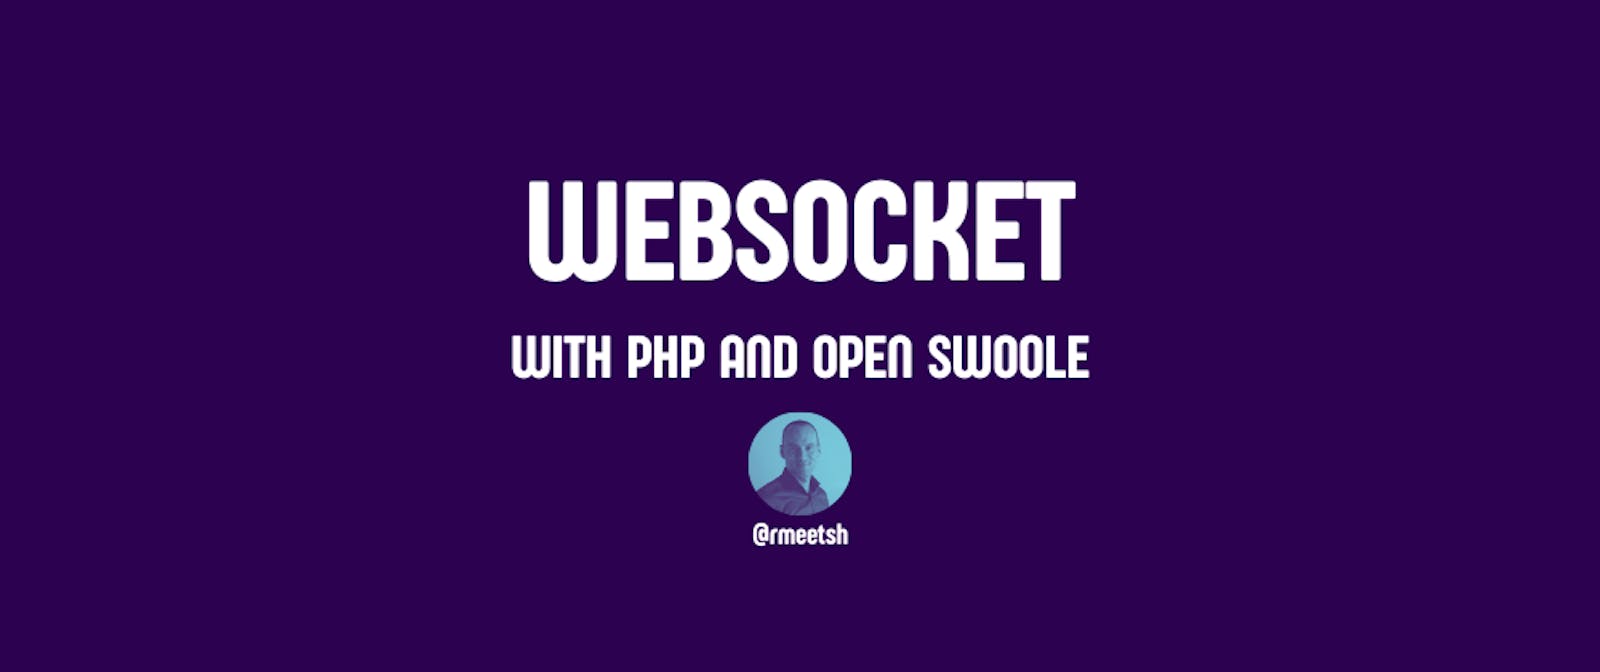 WebSocket with PHP